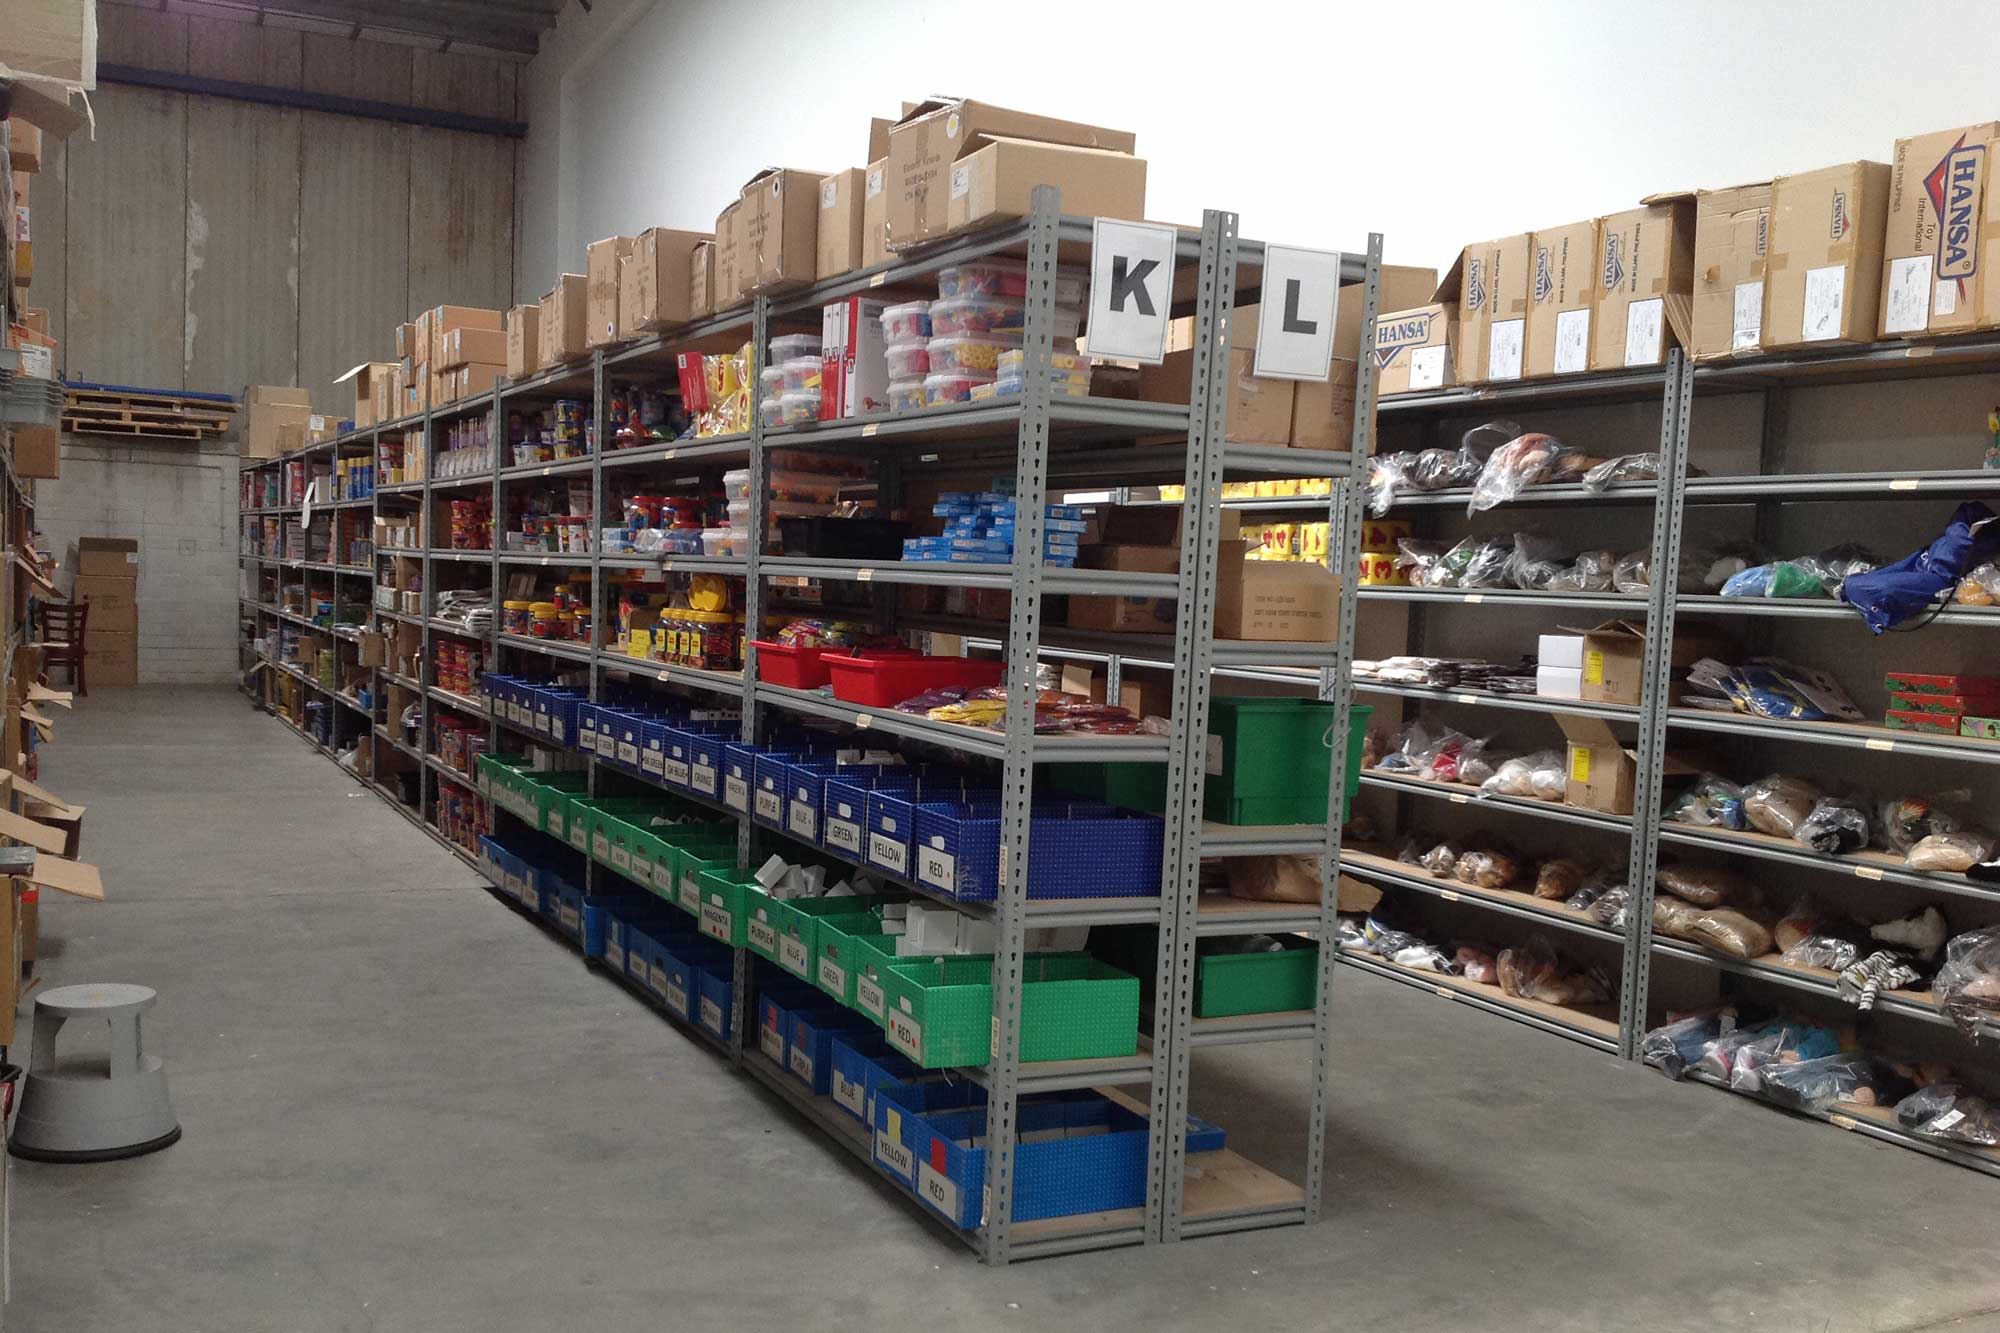 Steel shelving storage for small items in warehouse